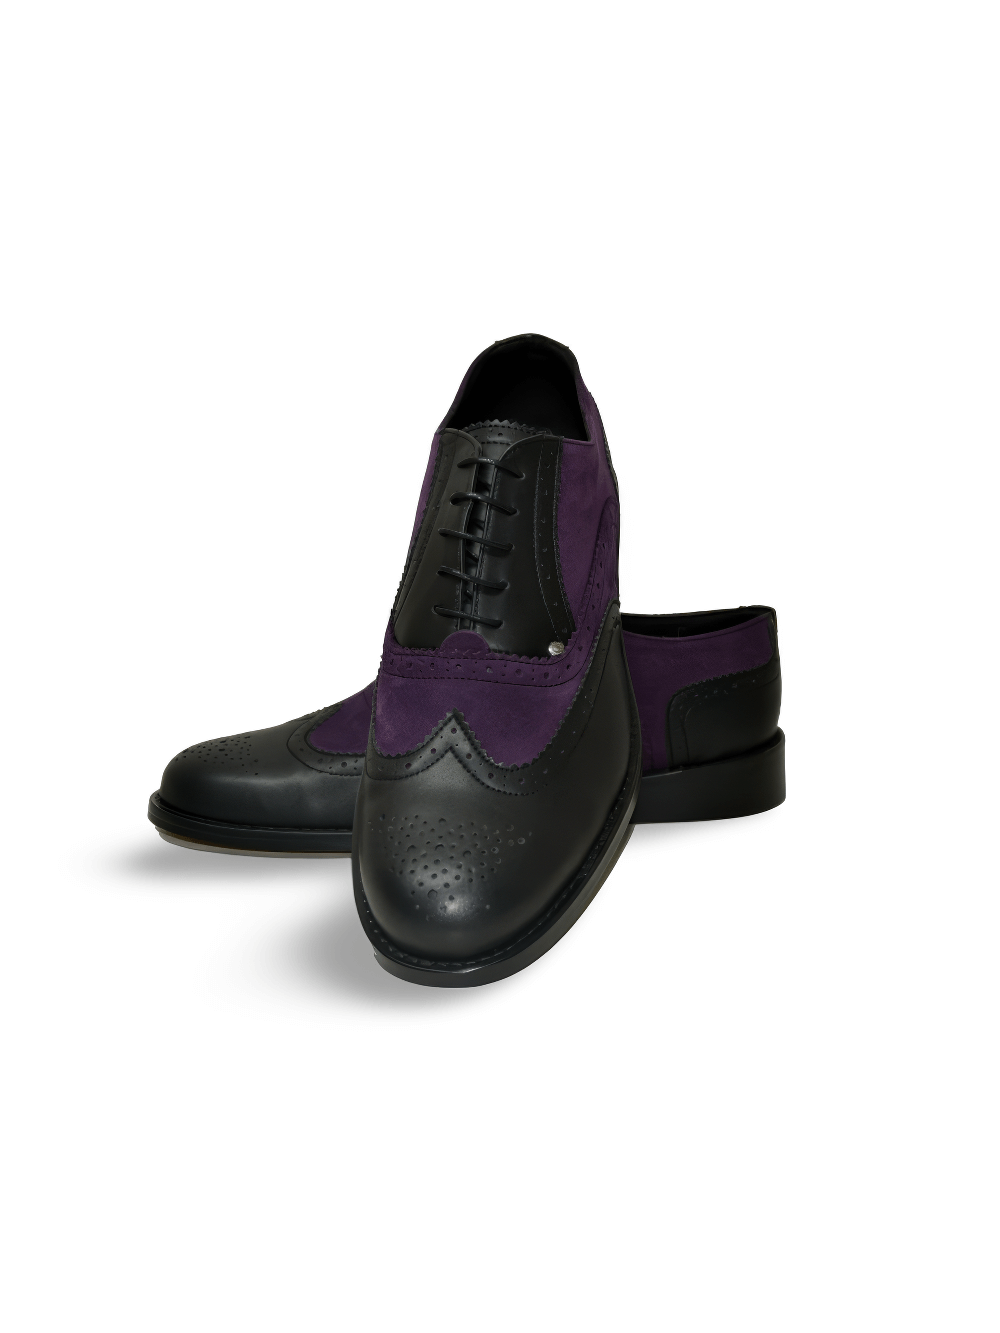 Men's Suede and Grained Leather Oxford Footwear